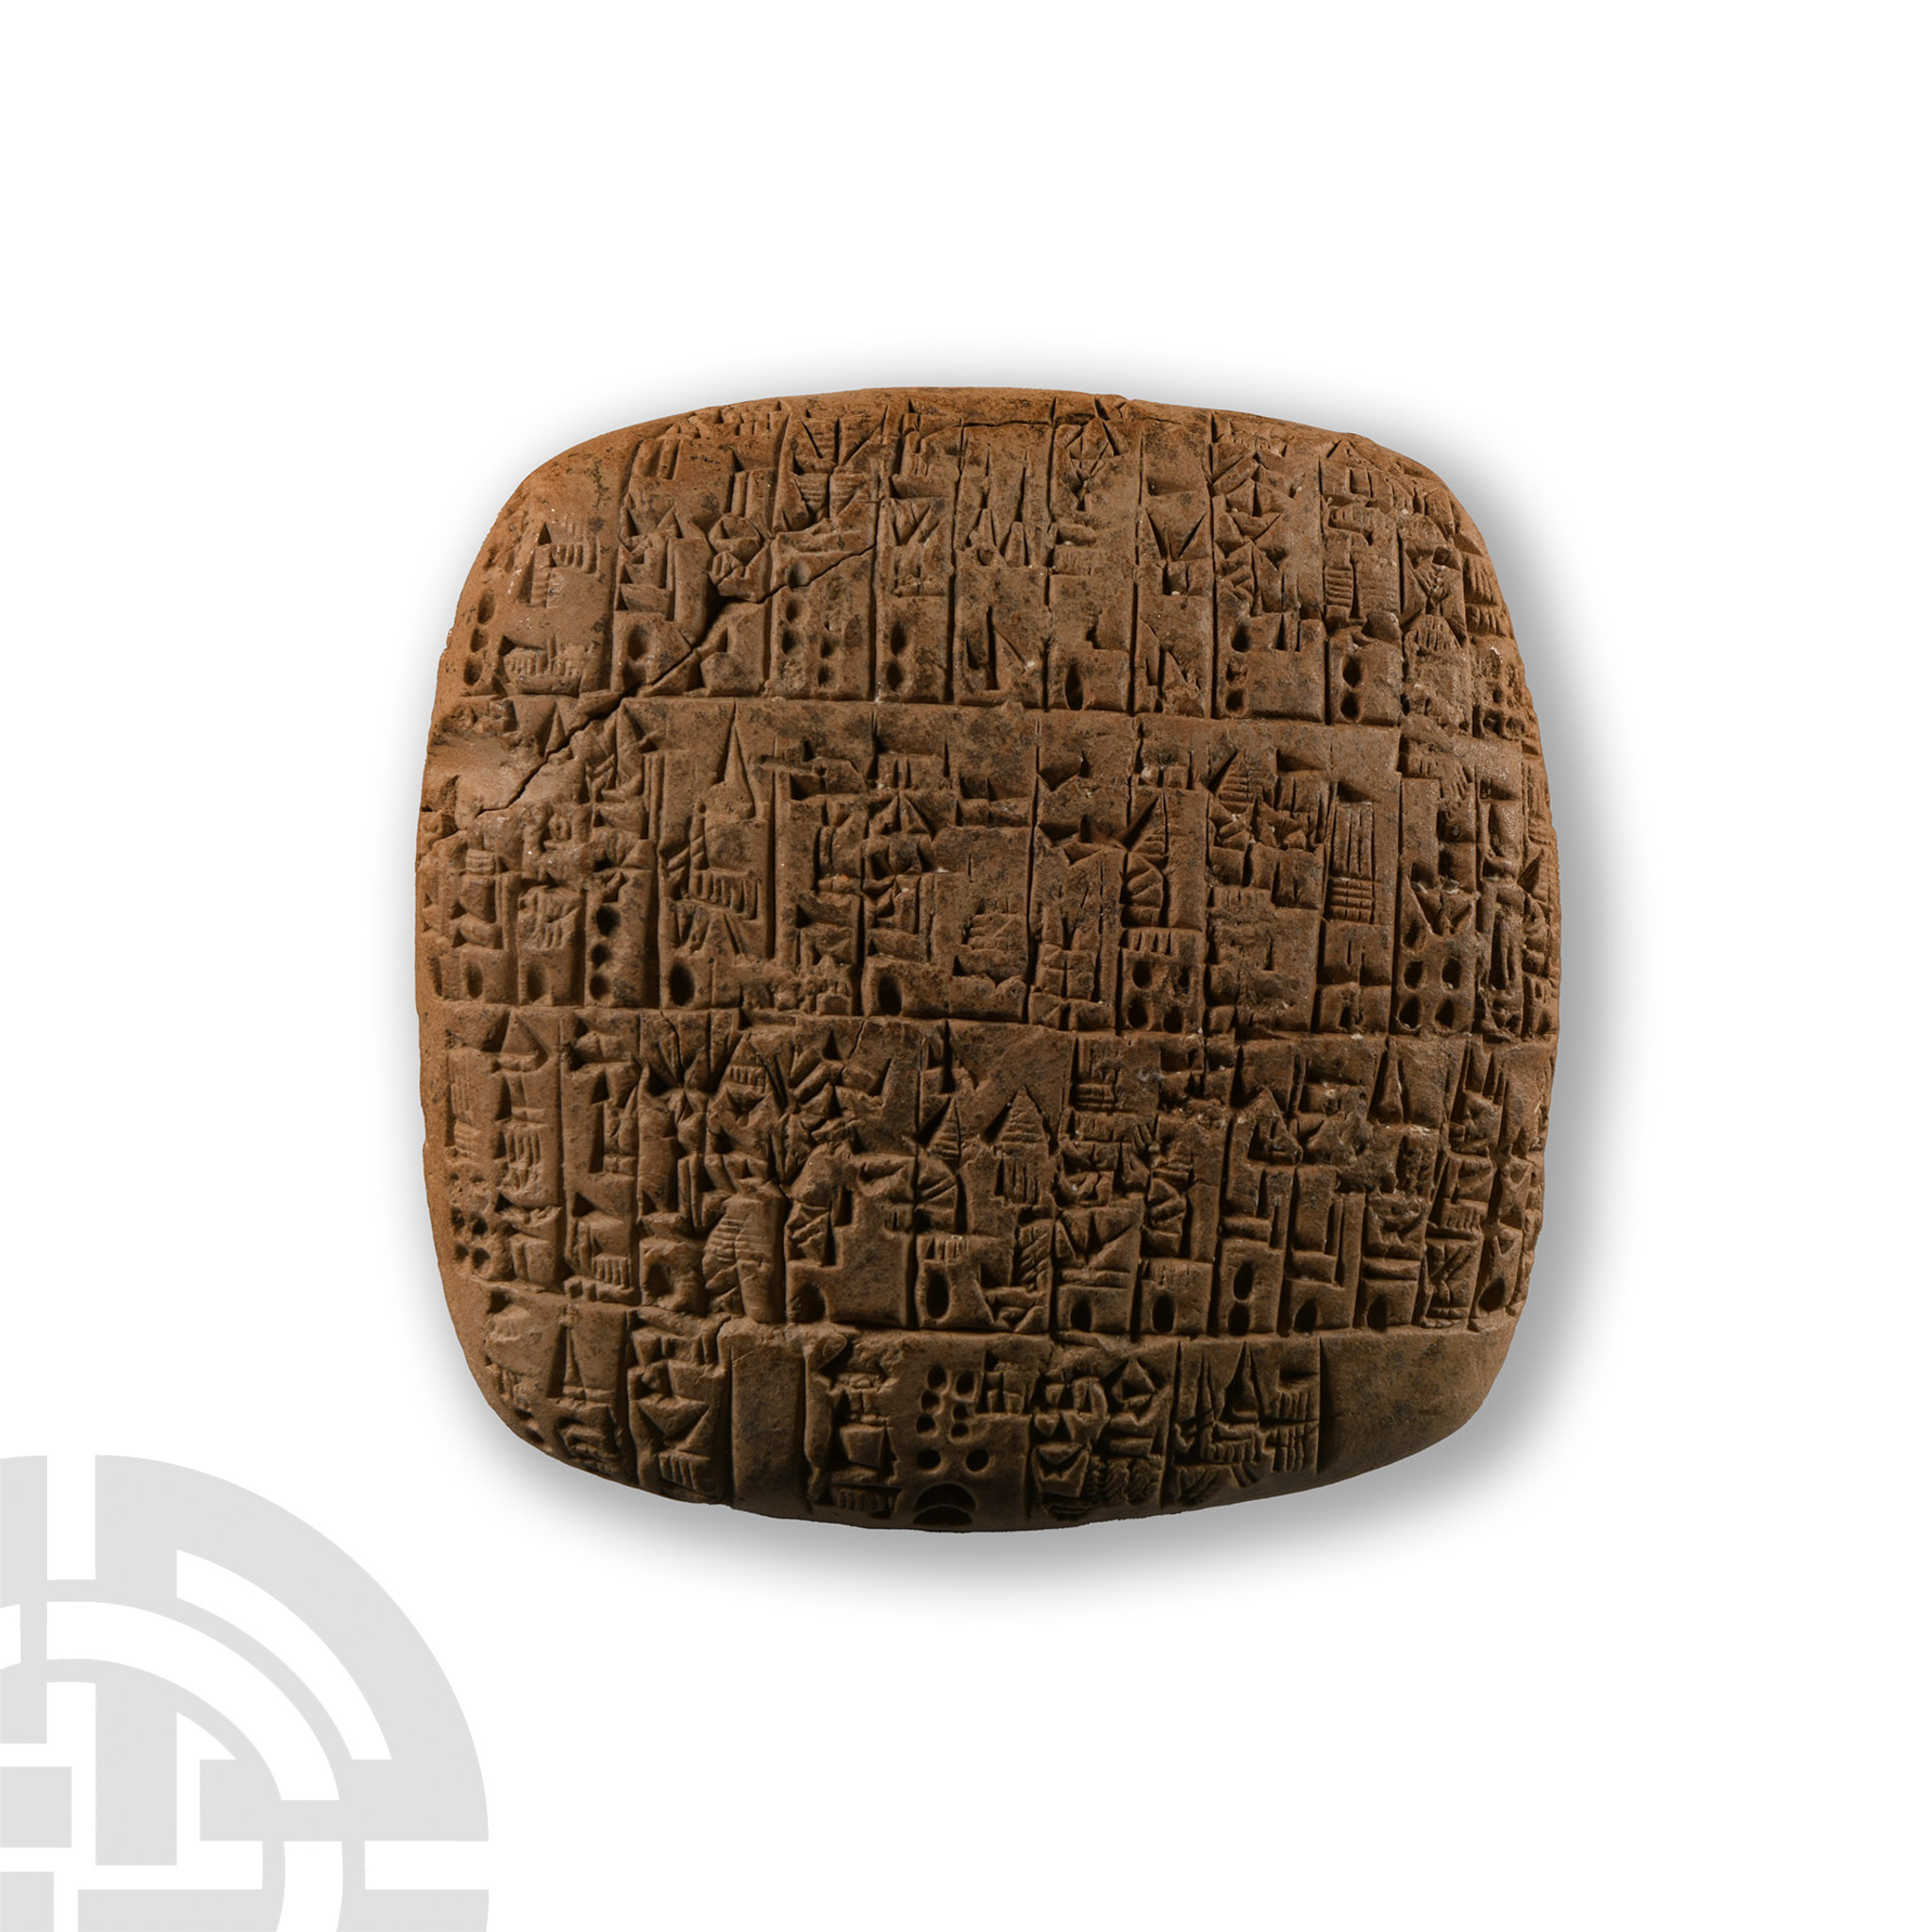 Early Dynastic Terracotta Cuneiform Administrative Tablet Recording Livestock and their Owners